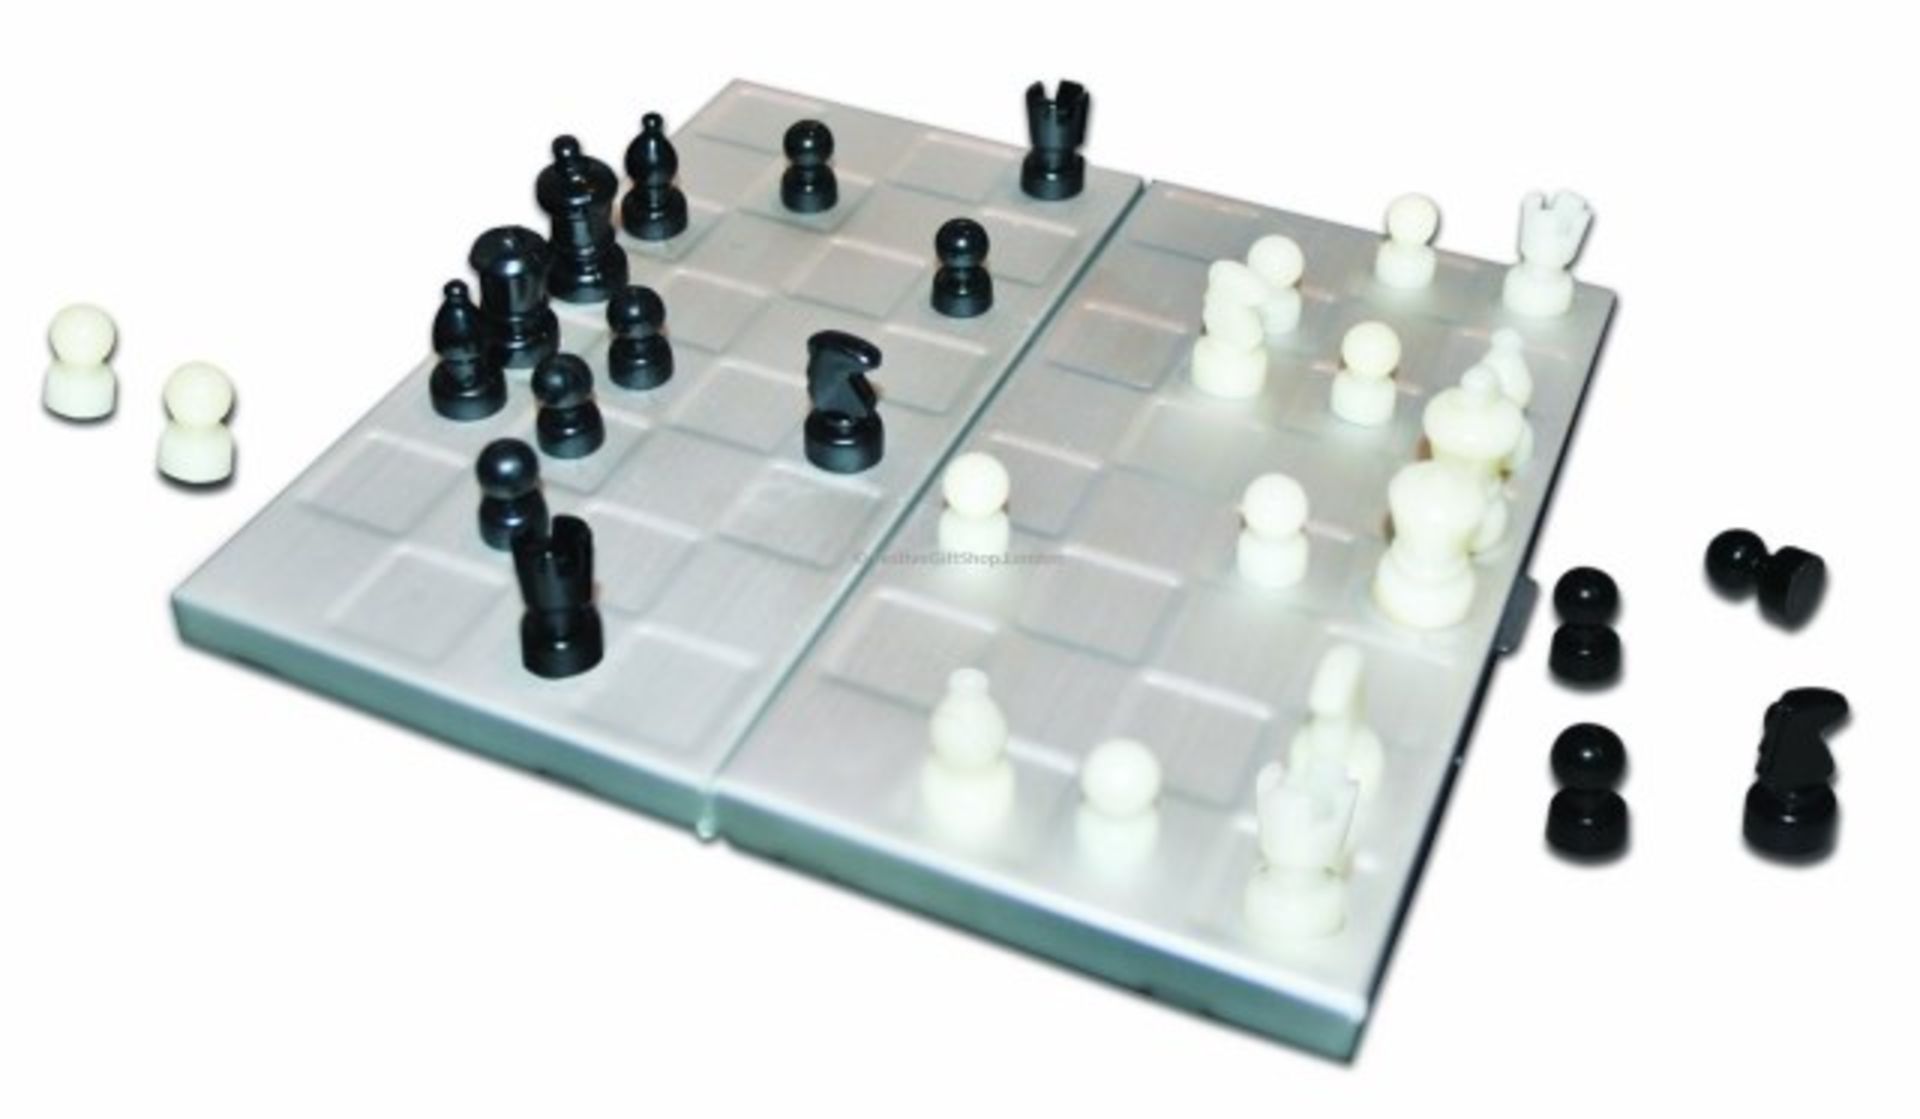 V Brand New Magnetic Chess Set In Aluminium case X 2 YOUR BID PRICE TO BE MULTIPLIED BY TWO